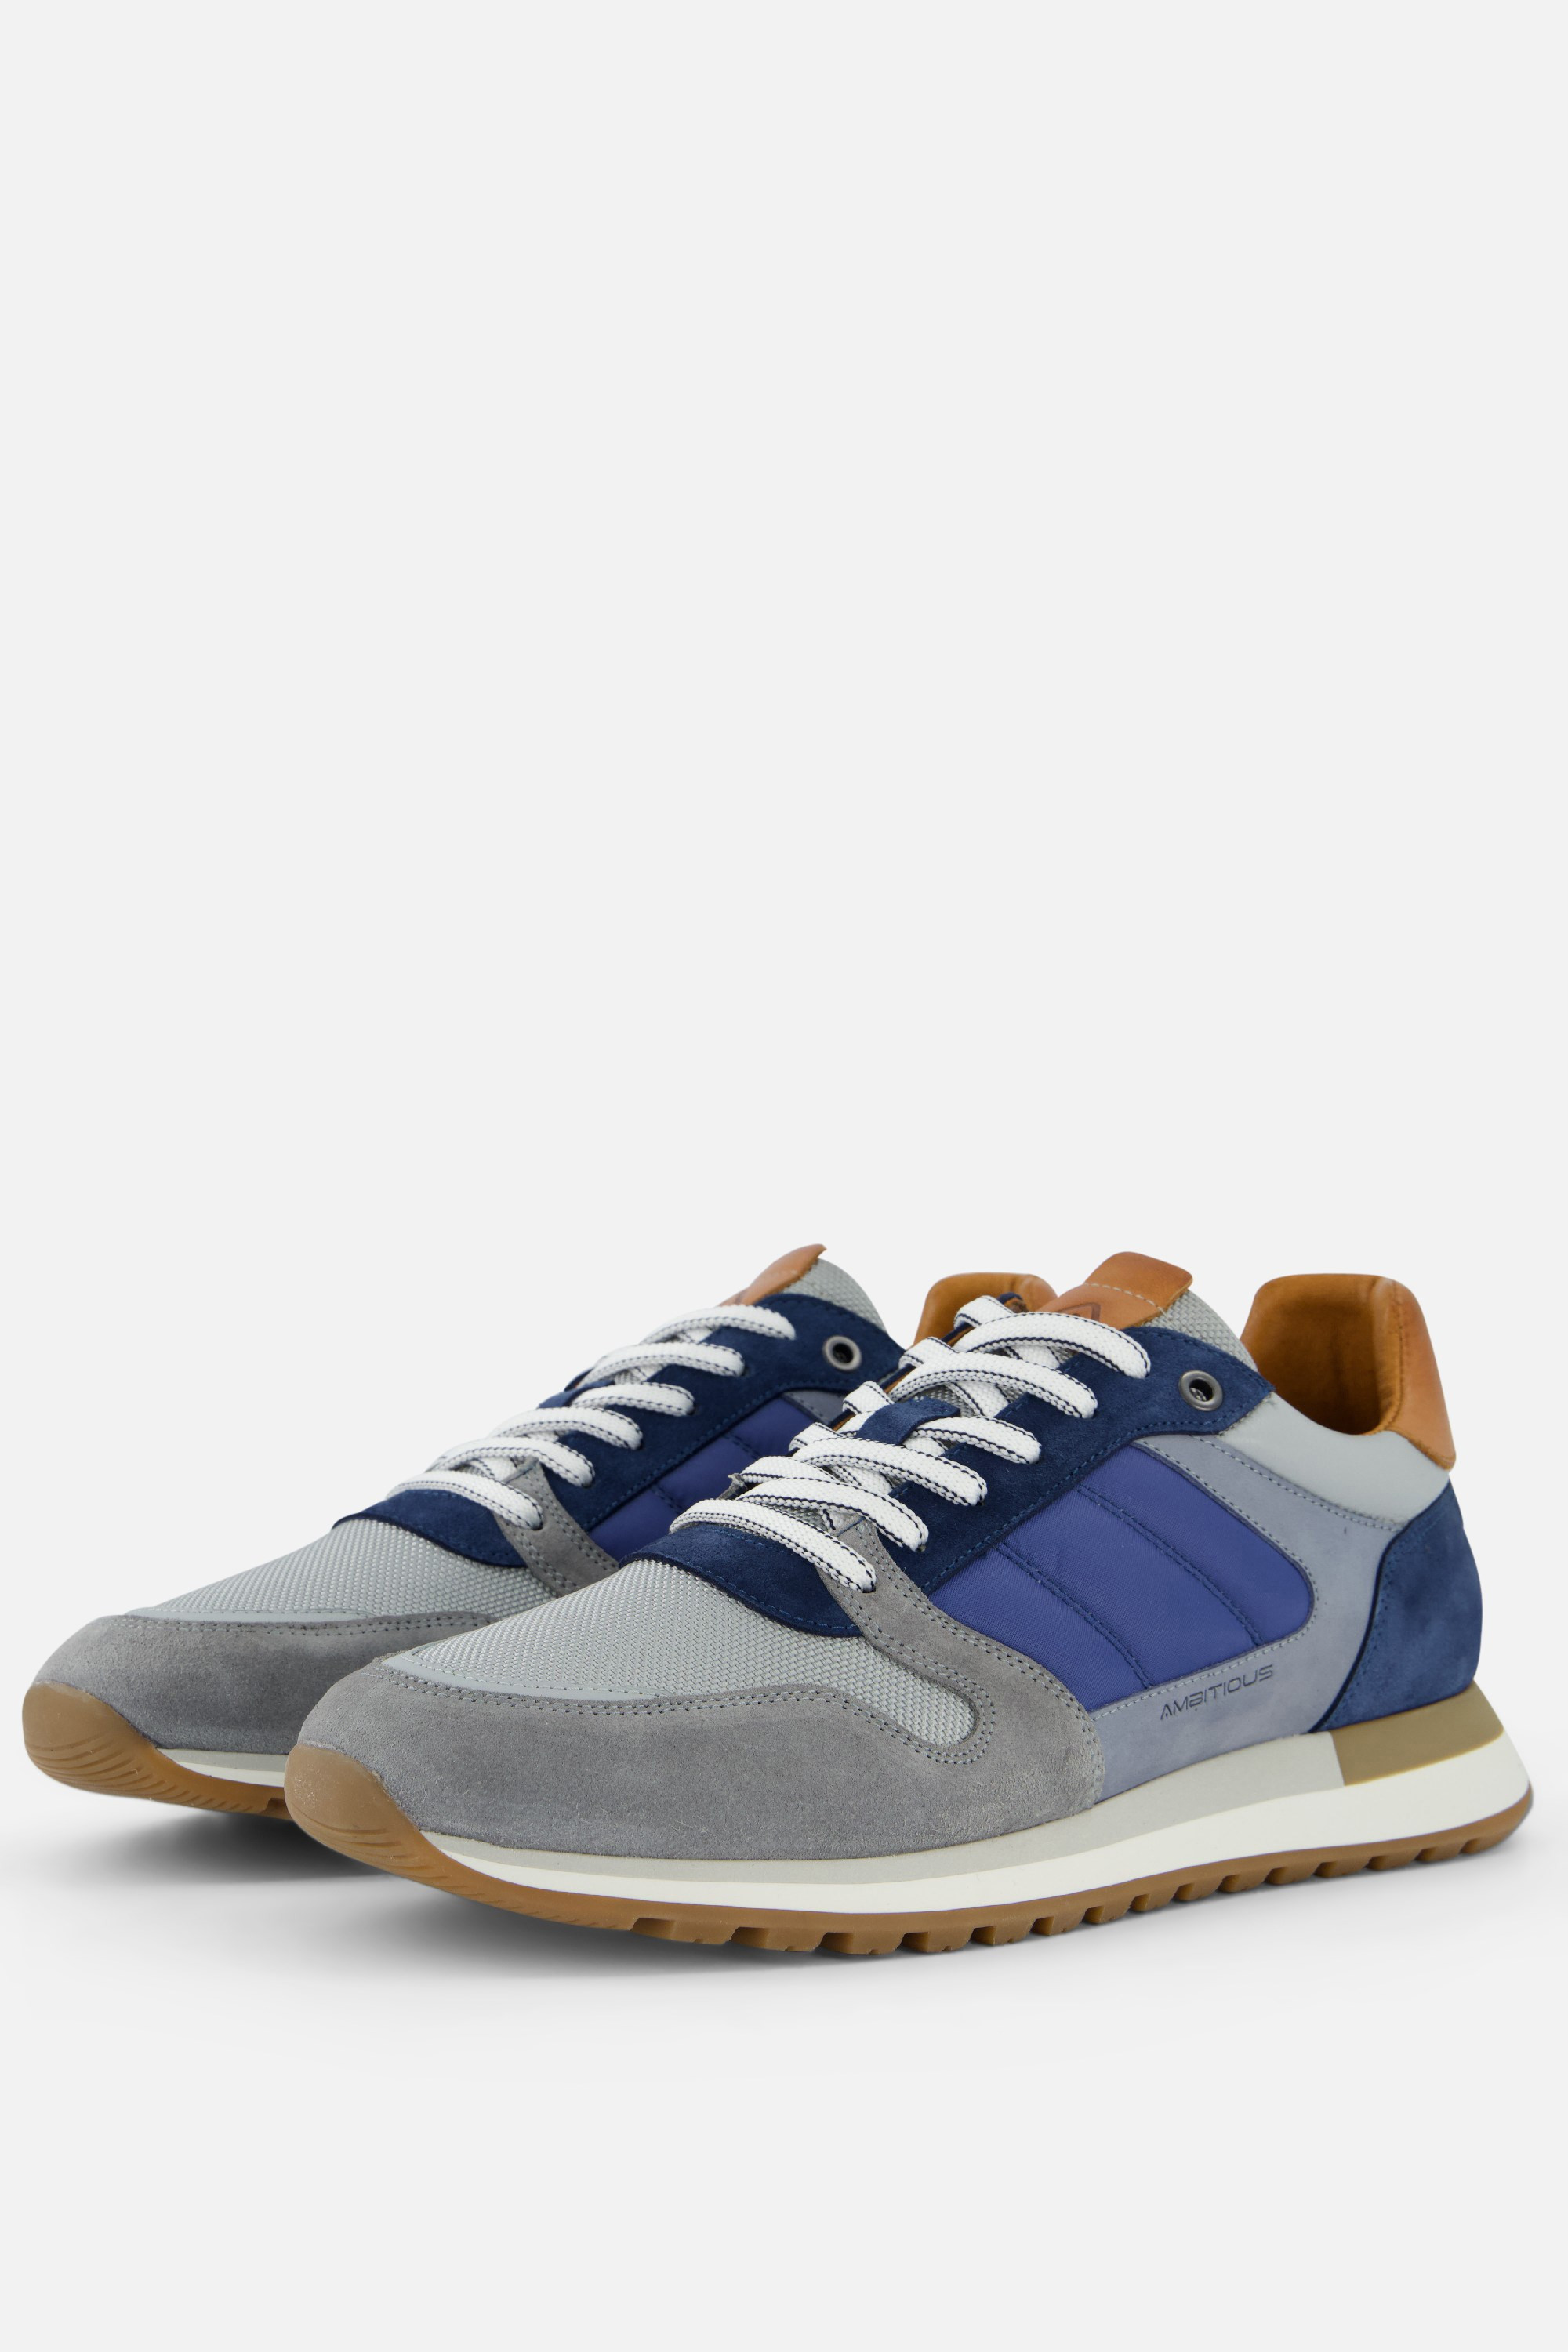 Ambitious Ambitious Grizz Sneakers blauw Leer